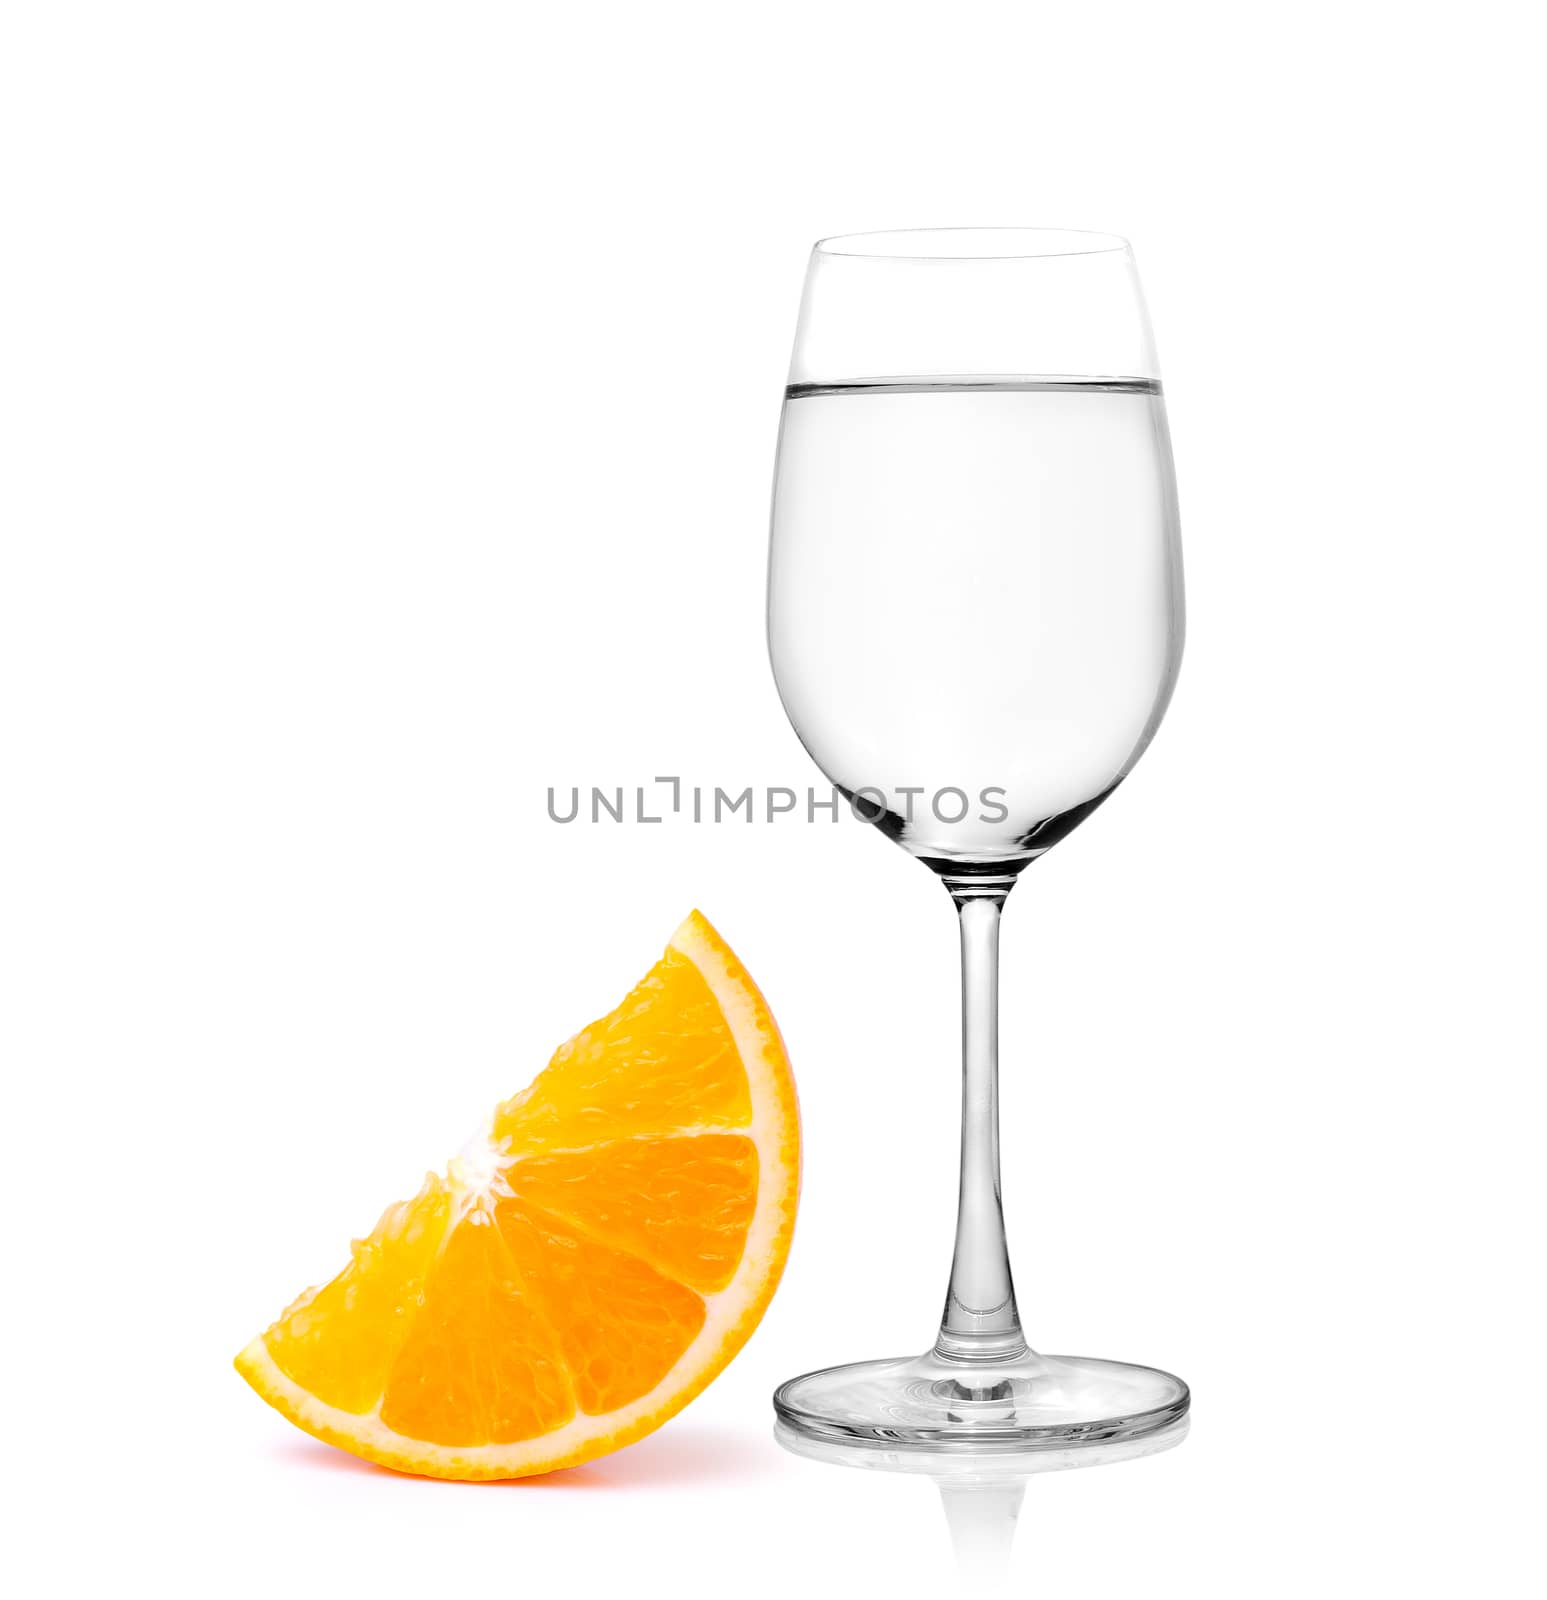 Glass of water and Half orange fruit on white background